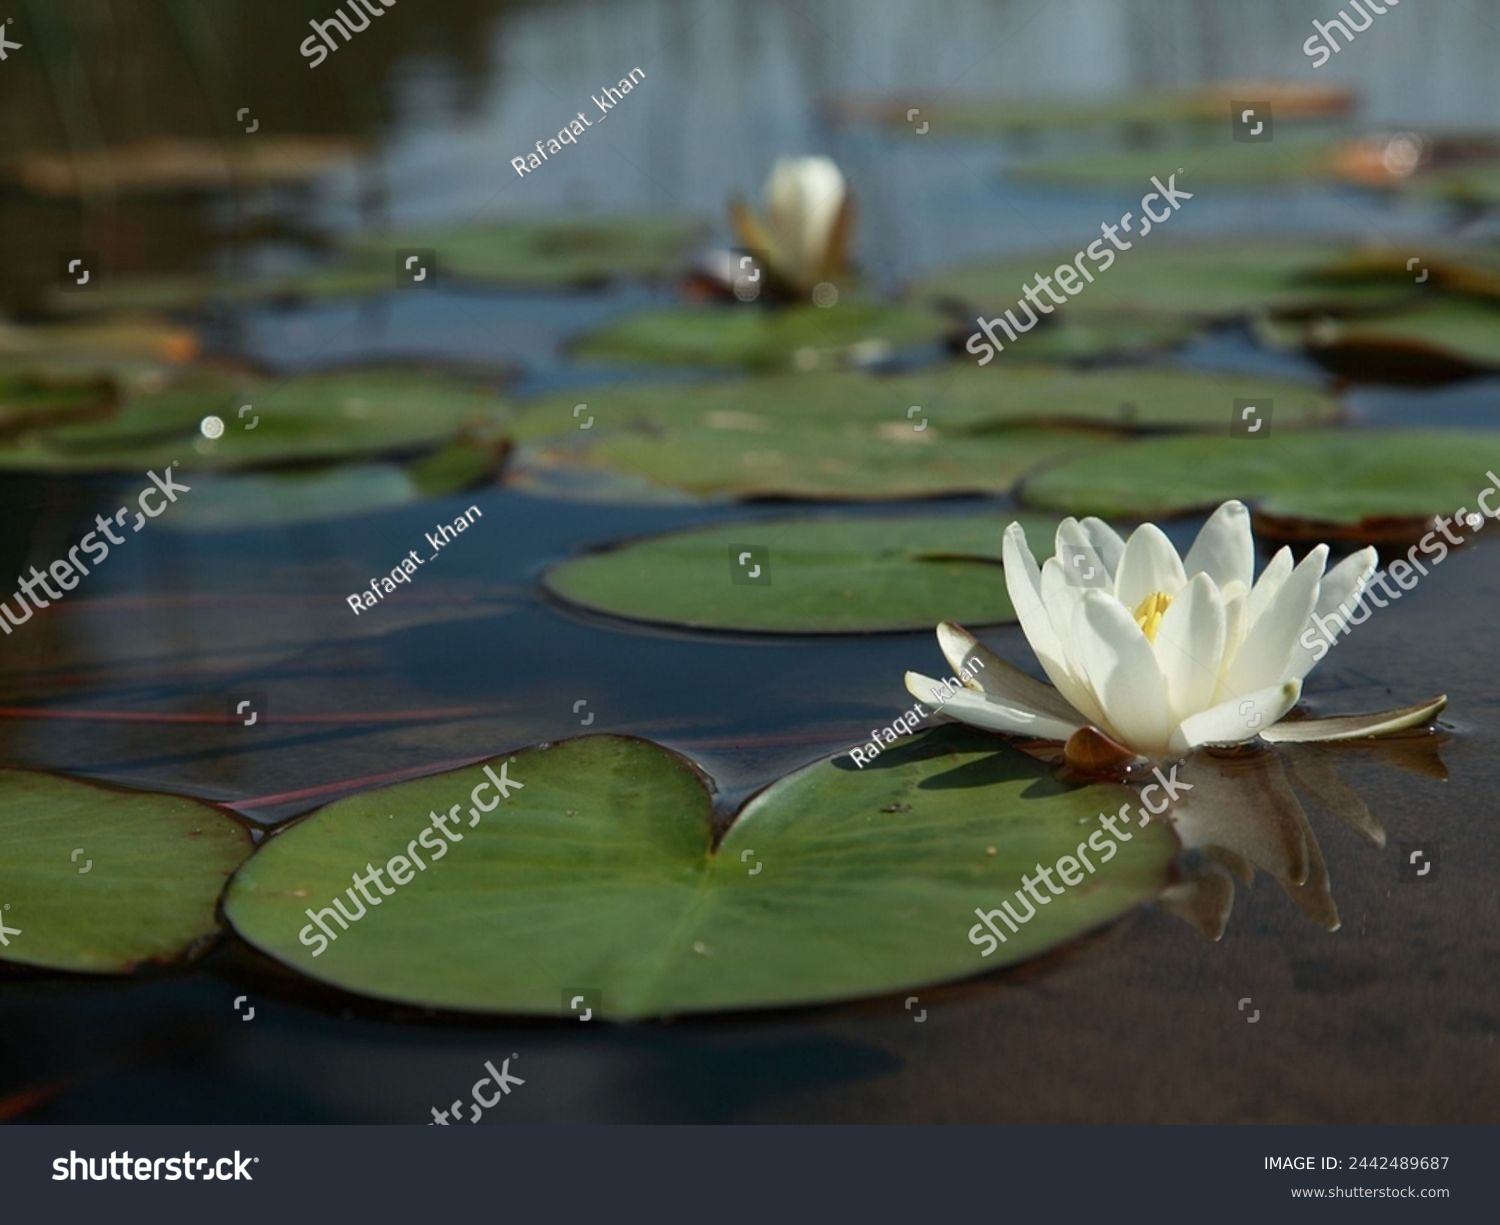 Beautiful White Lotus. White Lotus Flower Or Water Lily Floating On The Water #2442489687